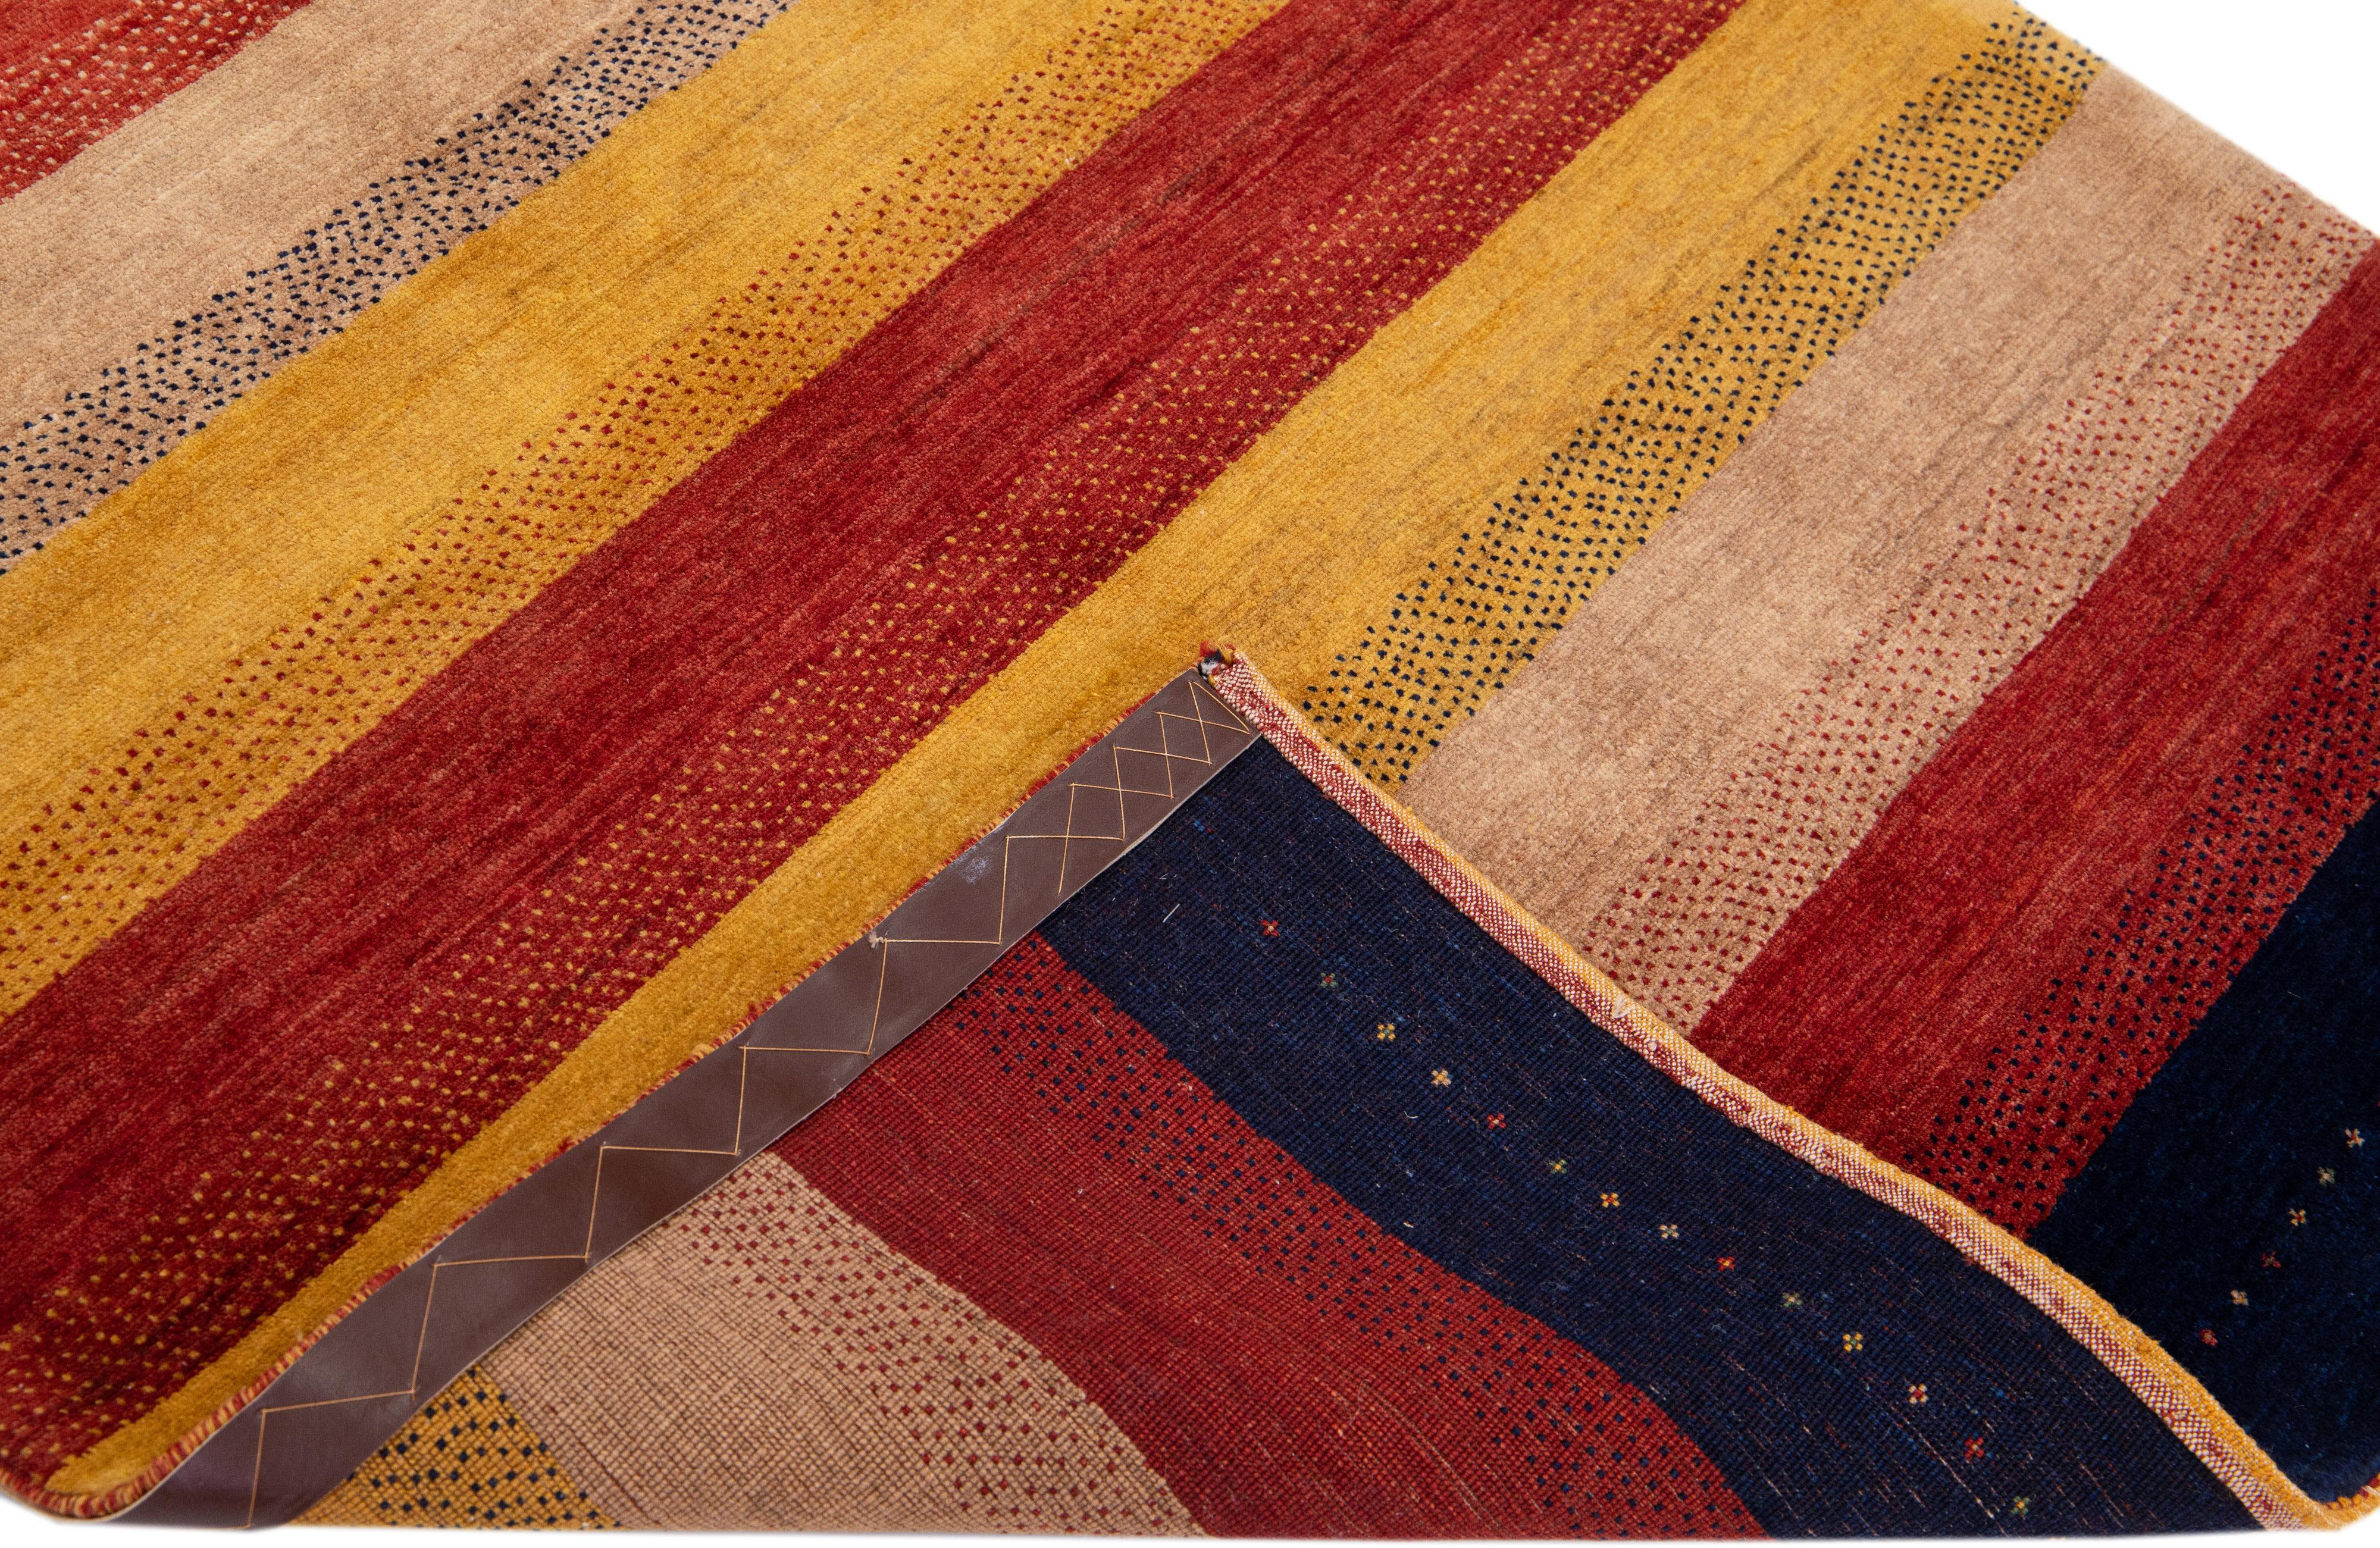 Beautiful modern Persian Gabbeh hand-knotted wool rug with a red, yellow, and brown field. This Gabbeh rug has a gorgeous stripe design.

This rug measures: 3'10